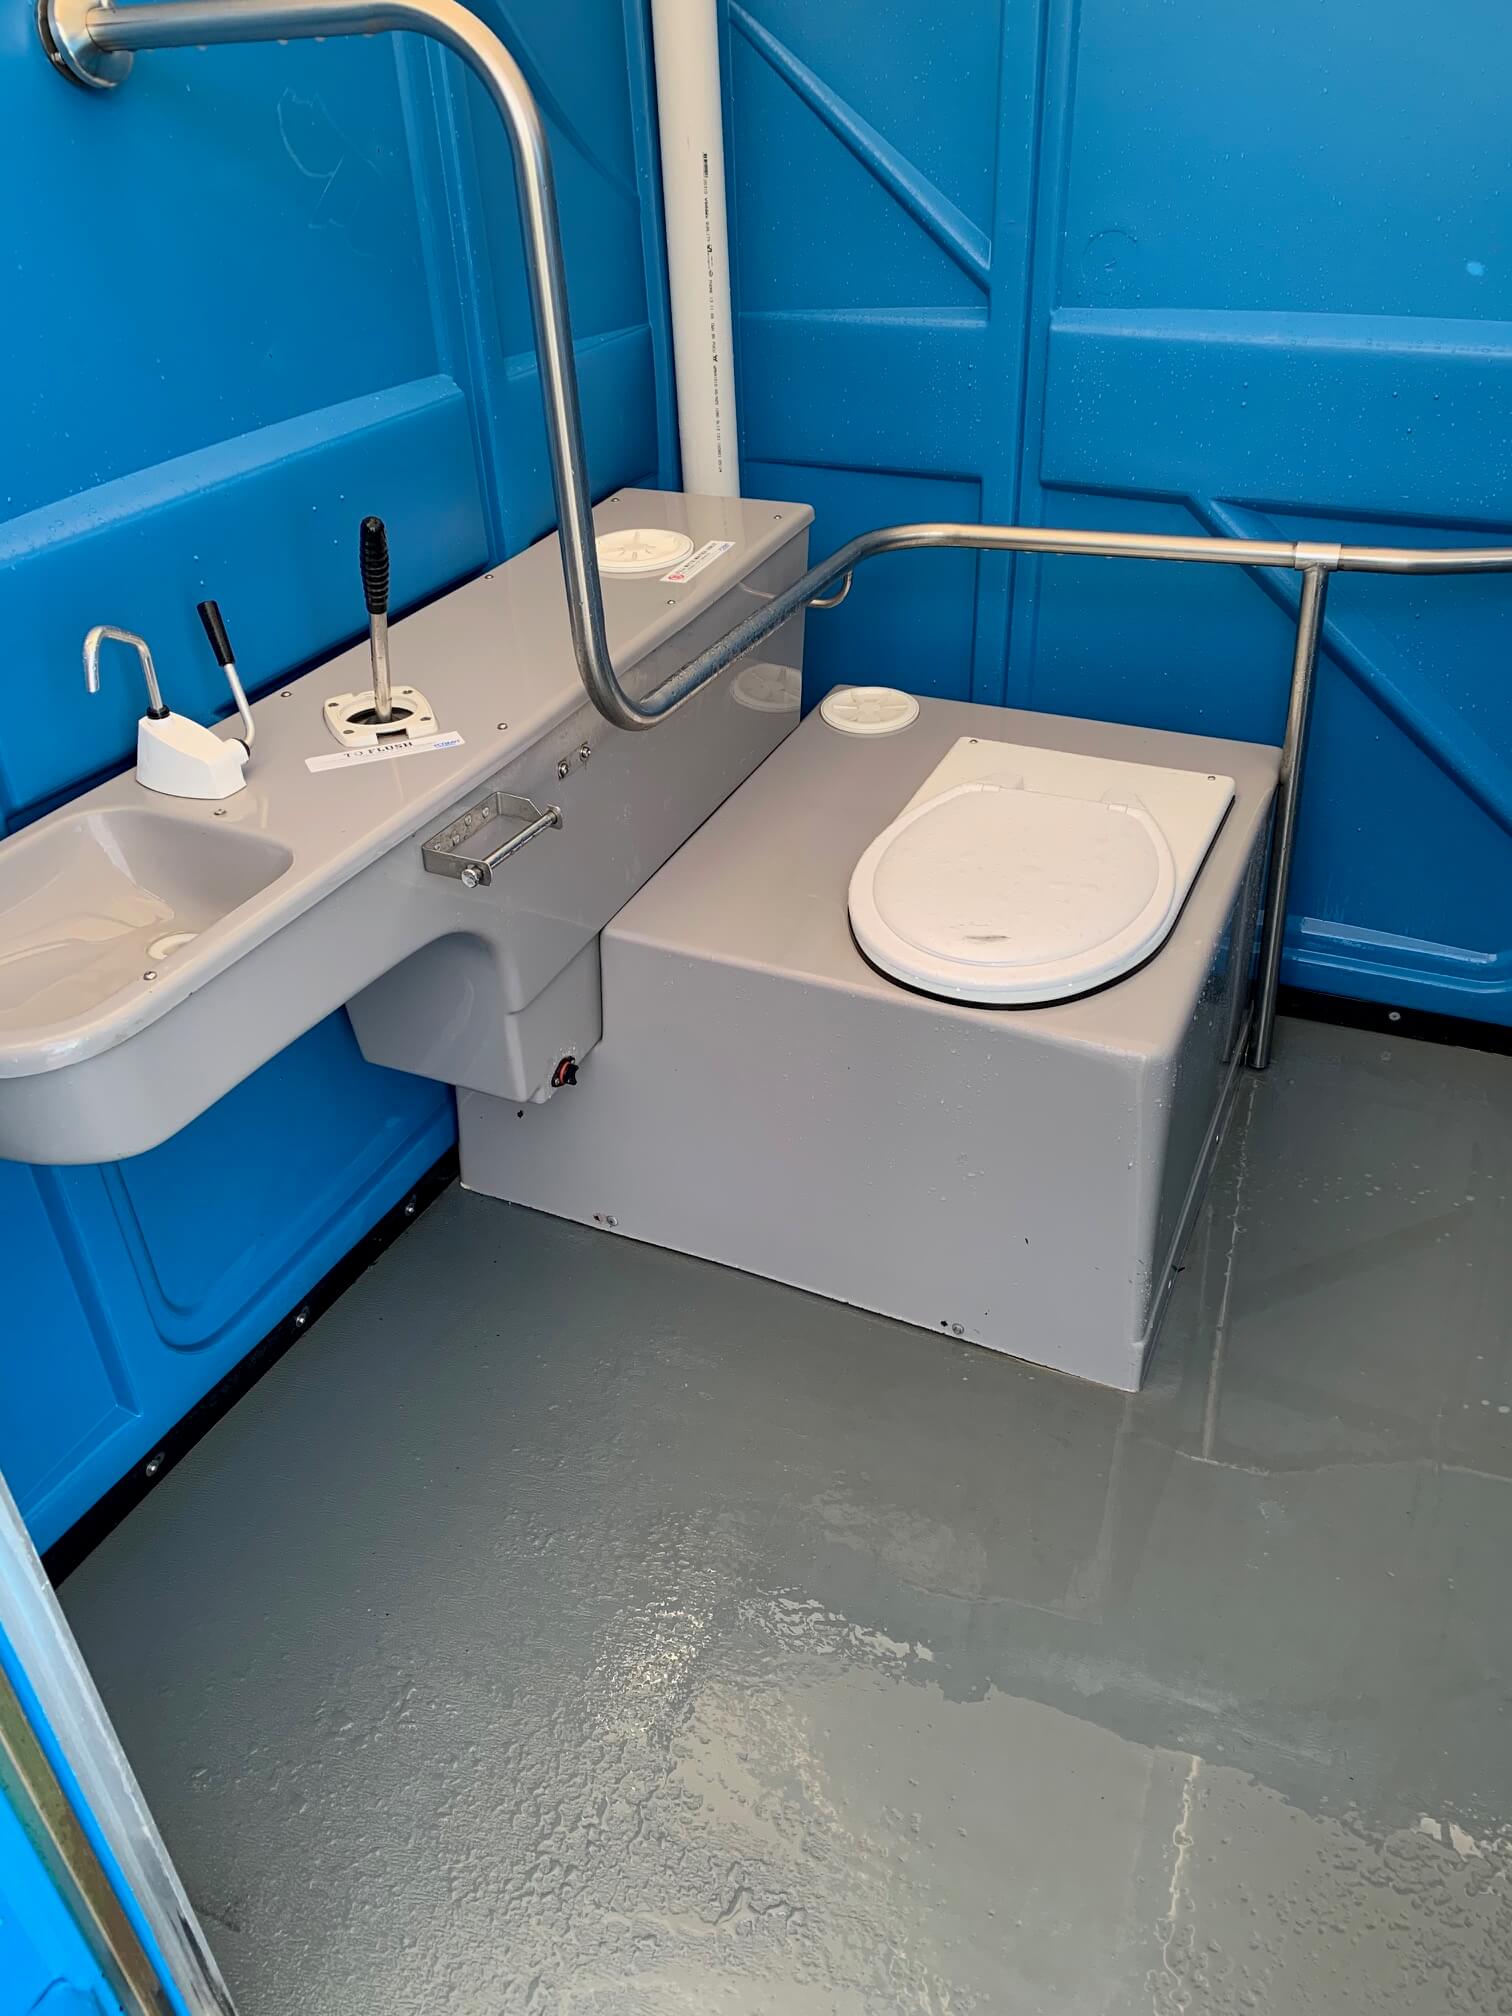 Portable disabled toilets interior